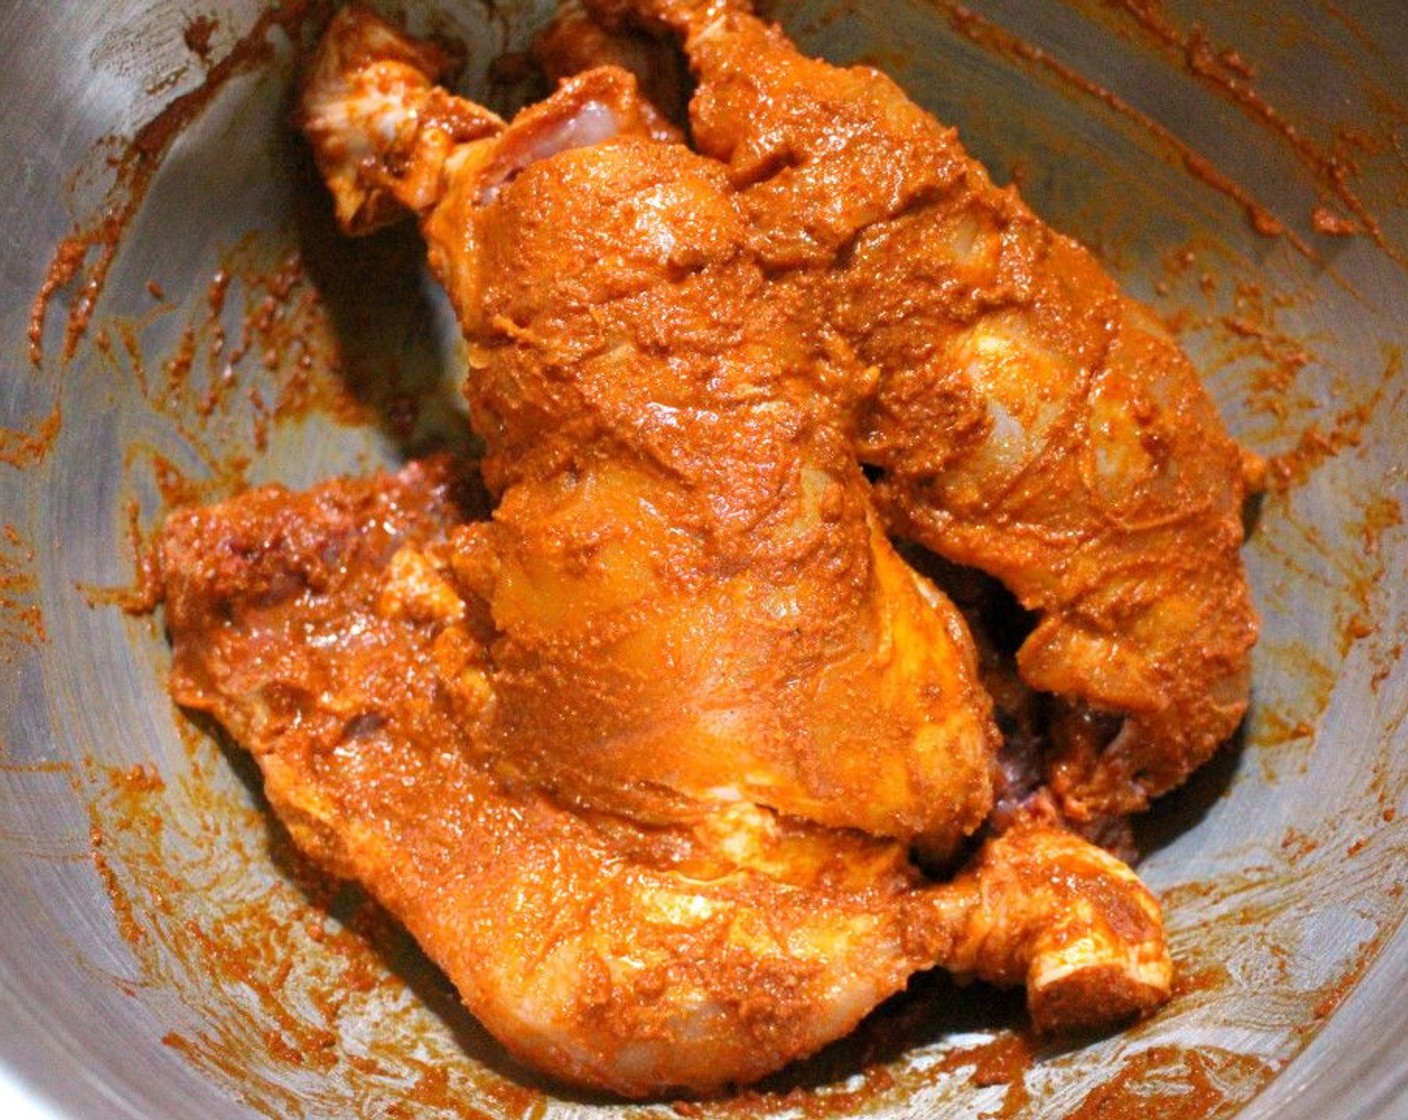 step 3 Thoroughly rub the Tandoori Paste (1/2 cup) into the chicken. Place in a bowl, cover, and refrigerate overnight.